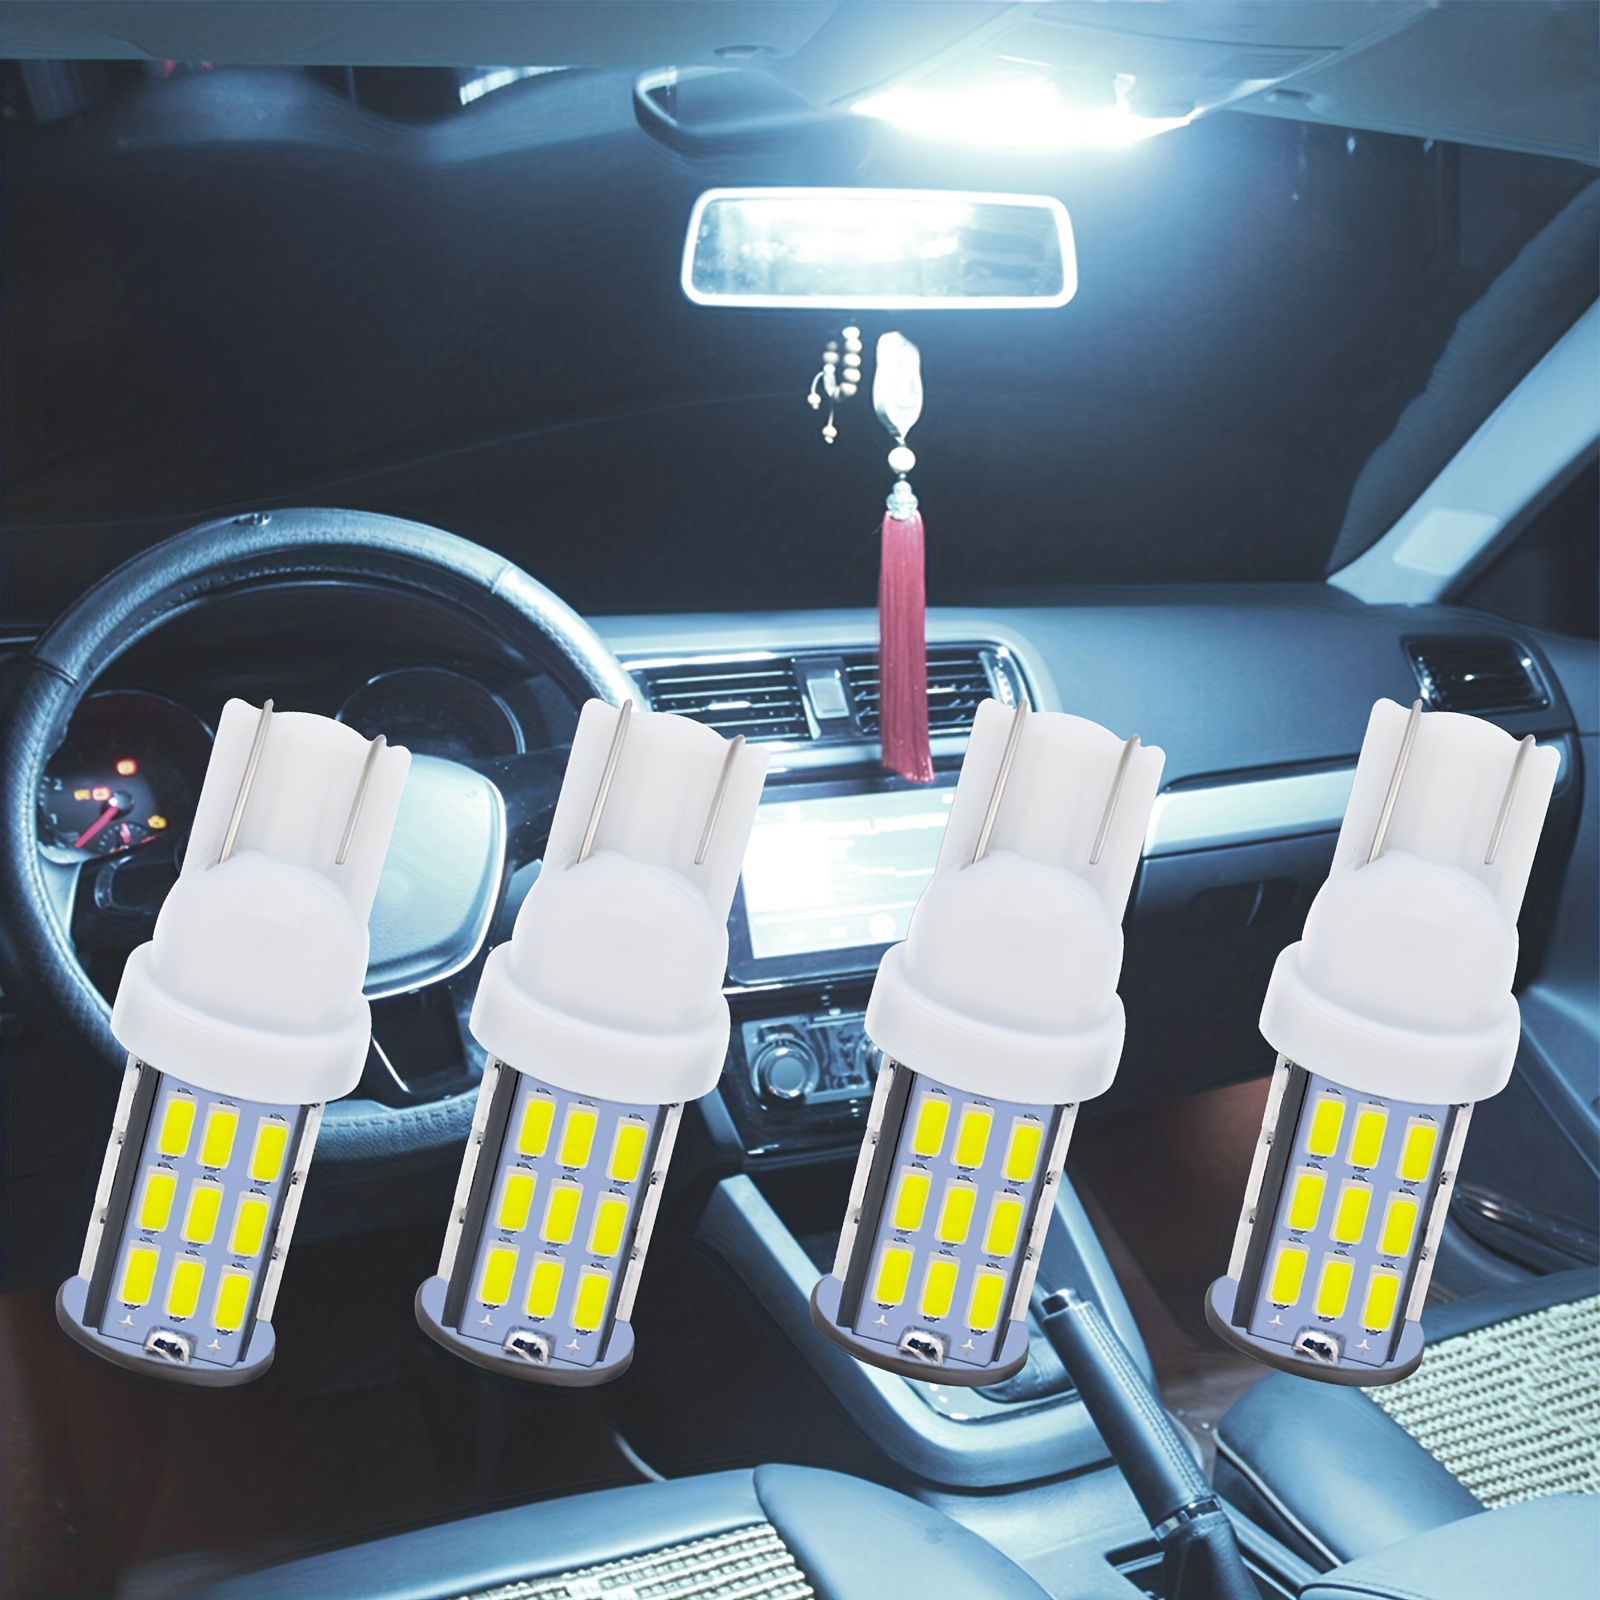 20pcs T10 921 168 LED Bulbs White, Super Bright 42smd 3014 LED Replacement  12 Volt RV Camper Trailer Boat Trunk Interior Dome Map License Lights